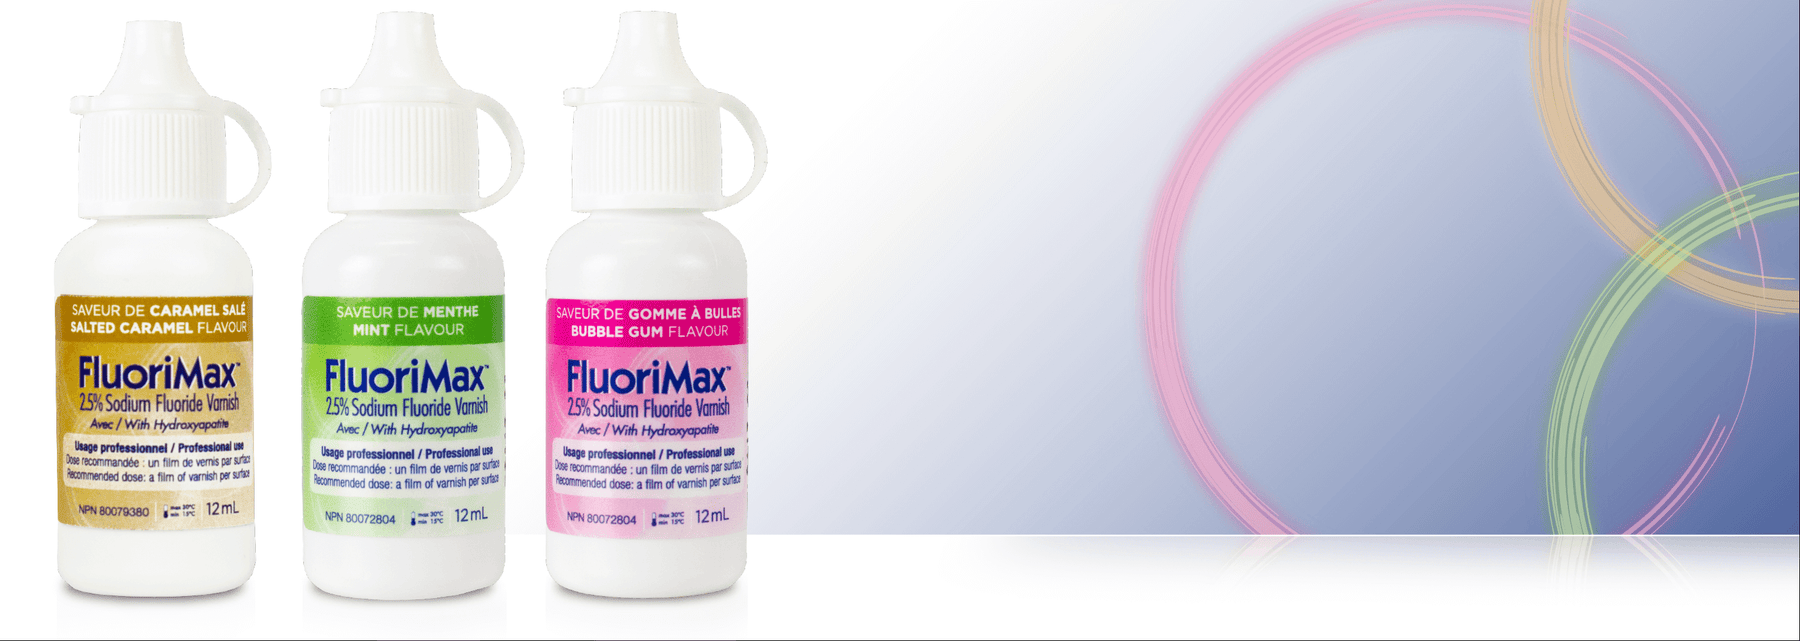 FluoriMax Varnish: A Personal Experience